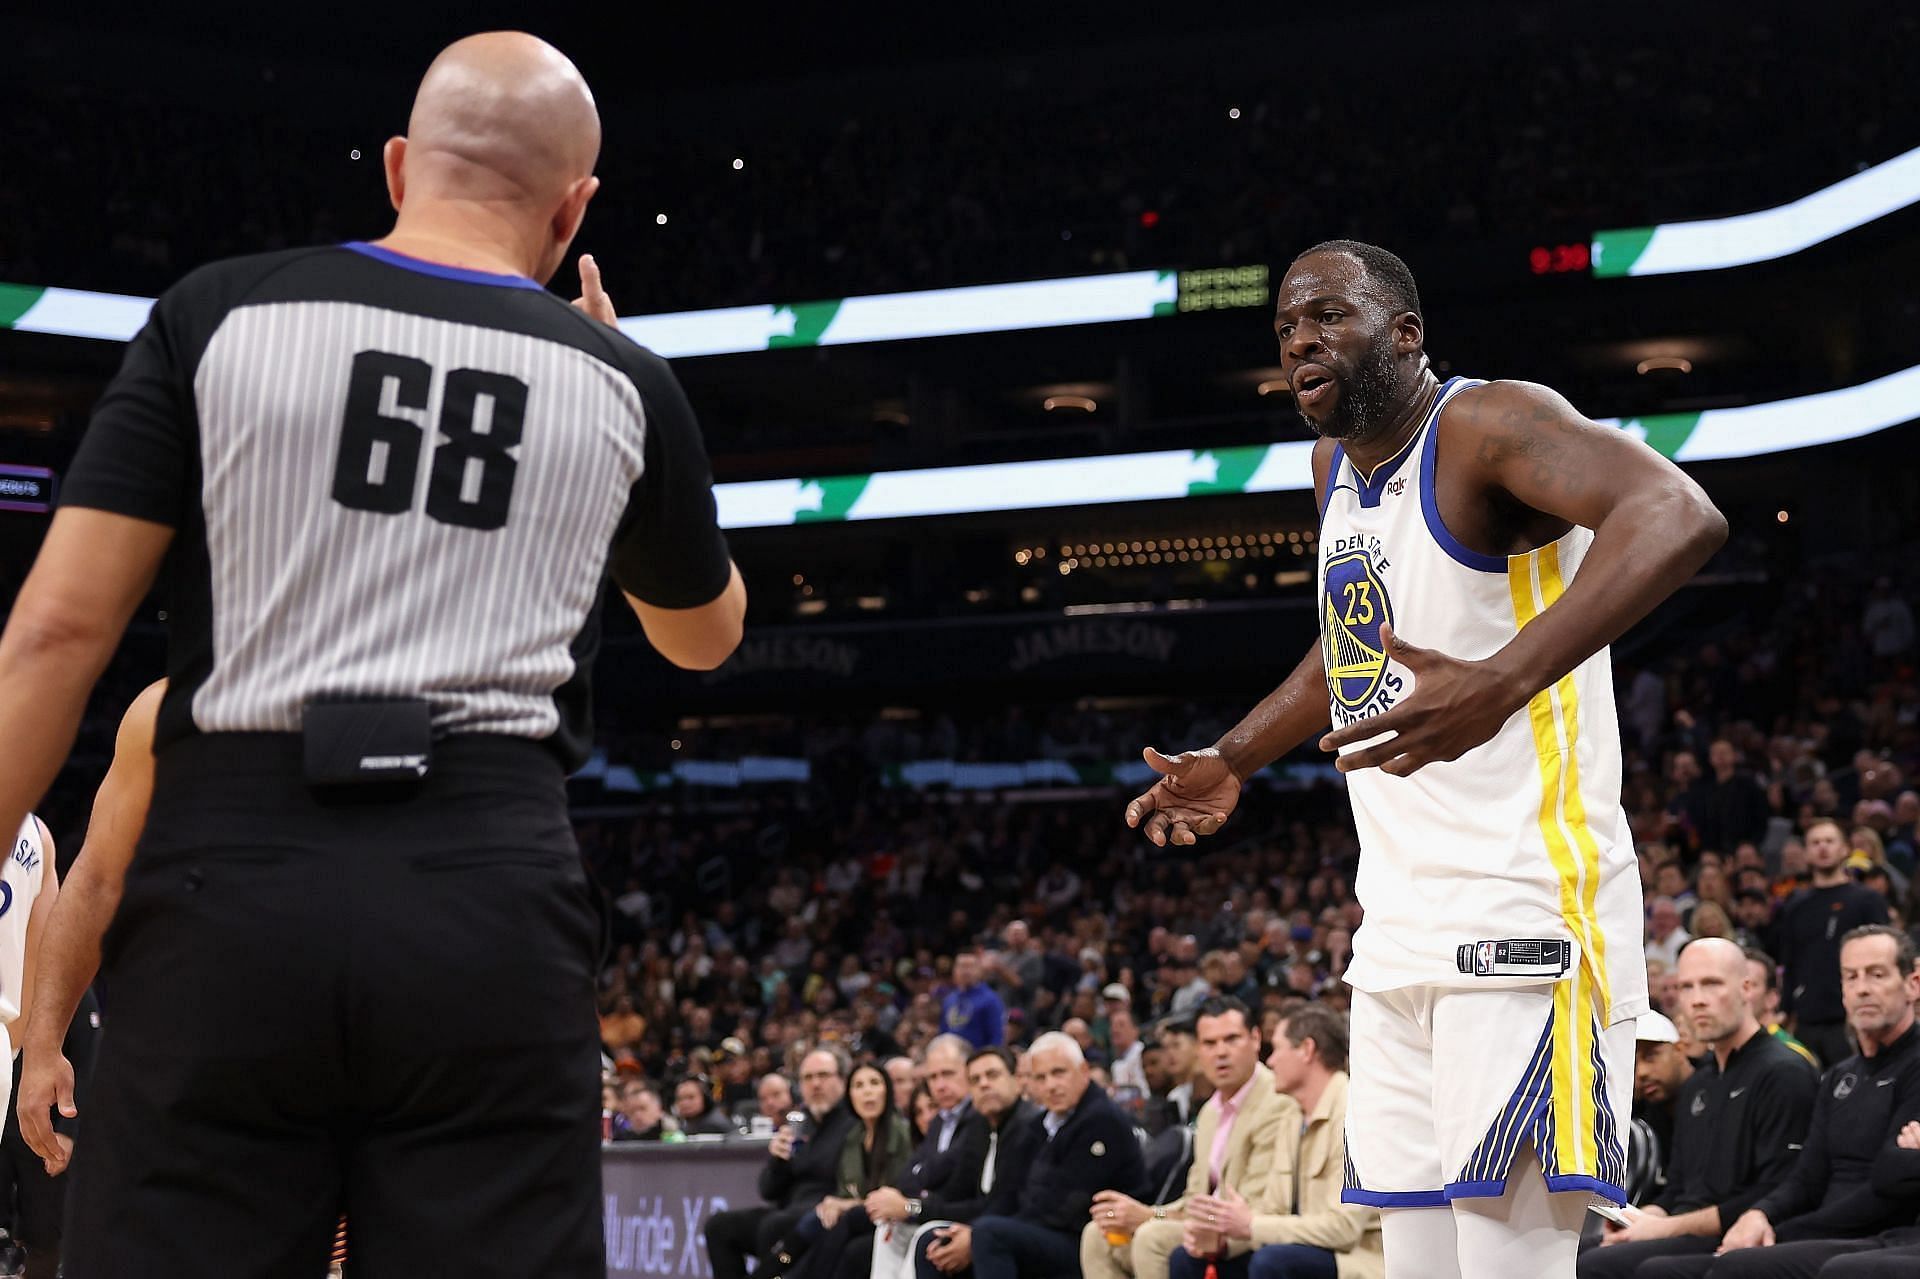 Draymond Green has been suspended indefinitely.